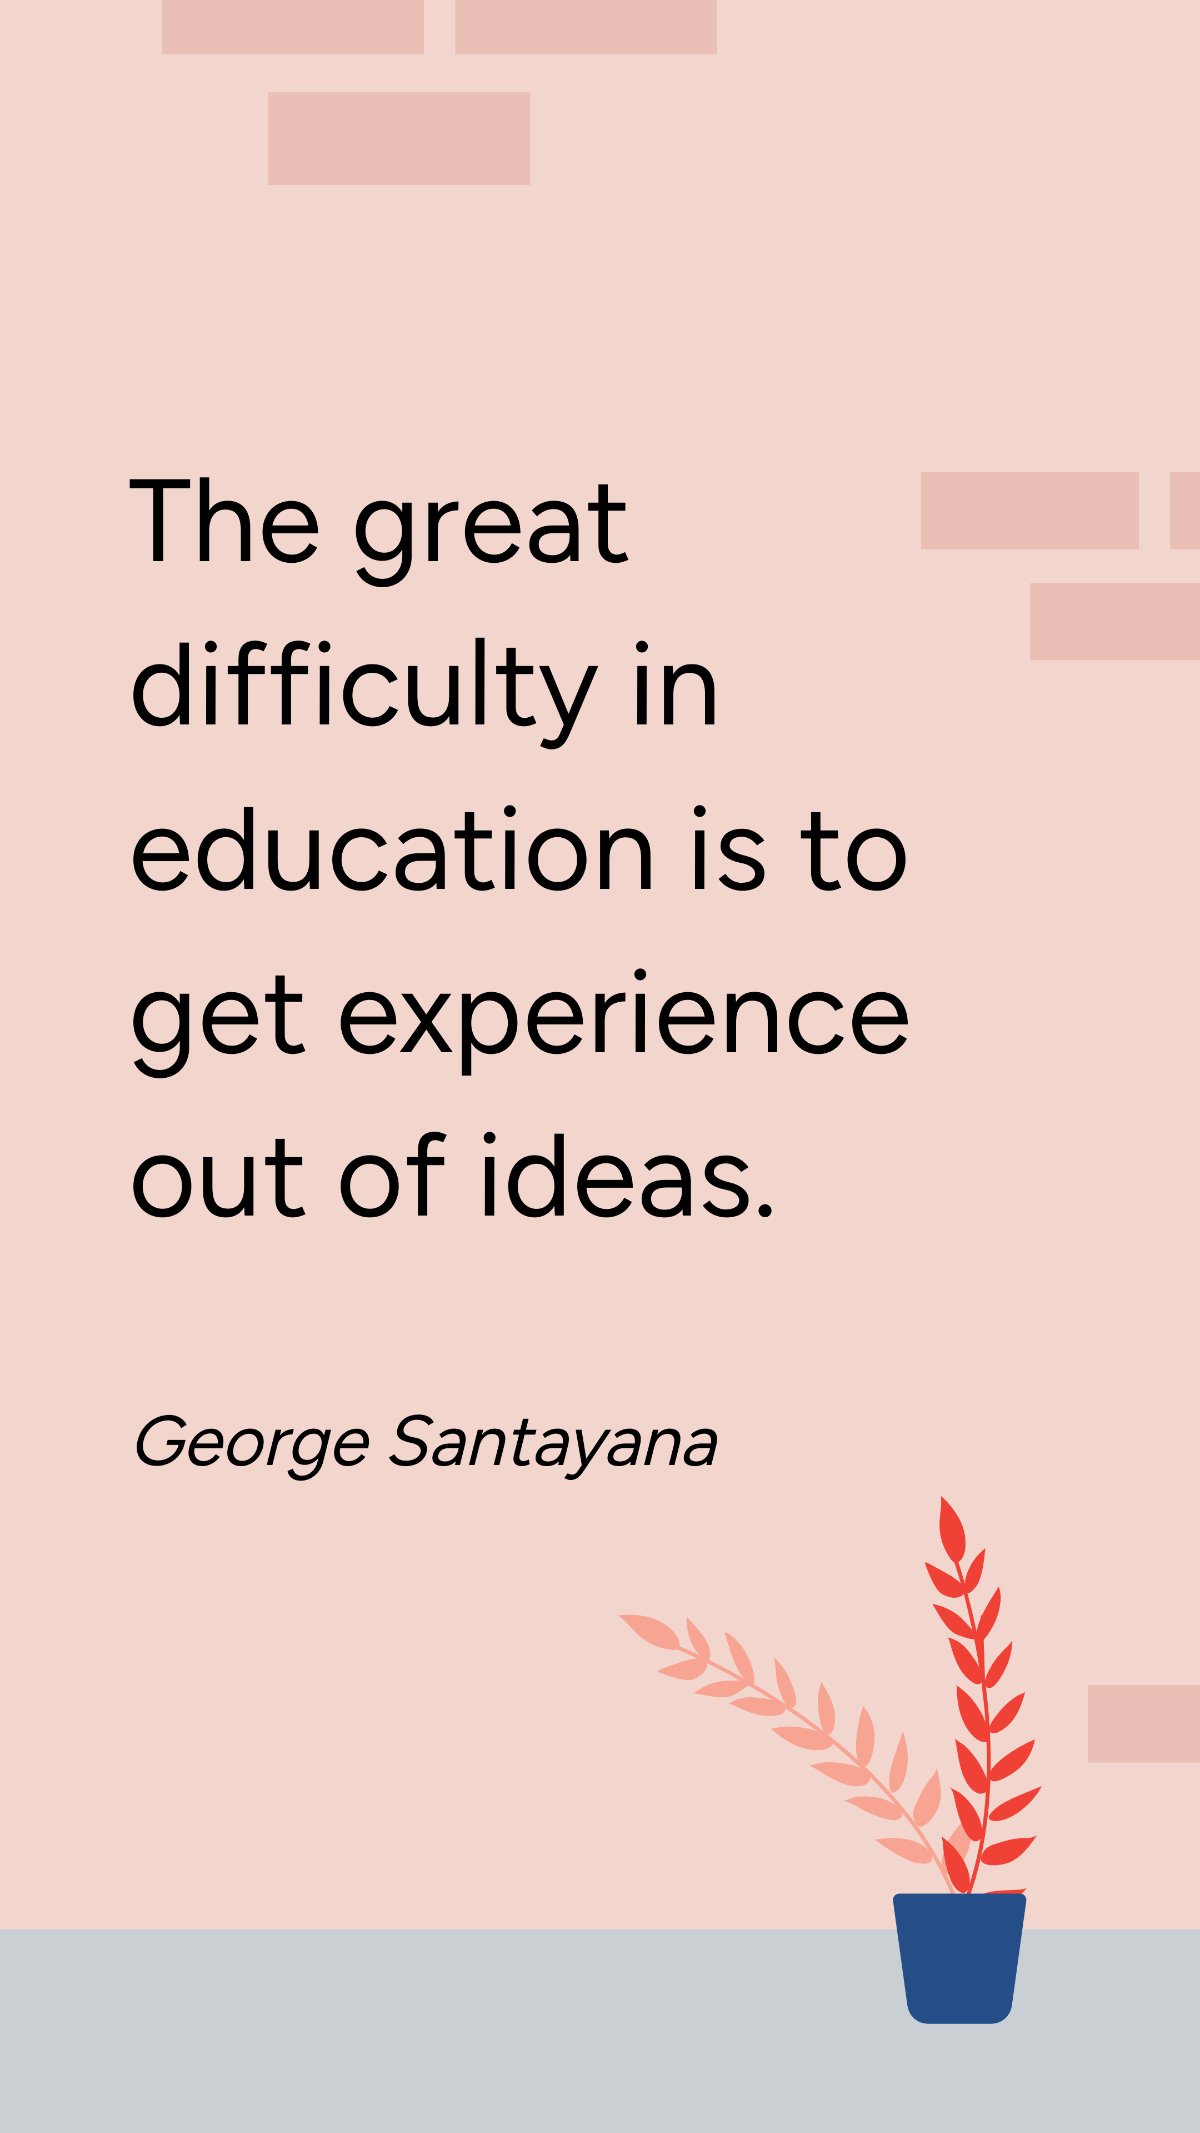 George Santayana - The great difficulty in education is to get experience out of ideas. Template